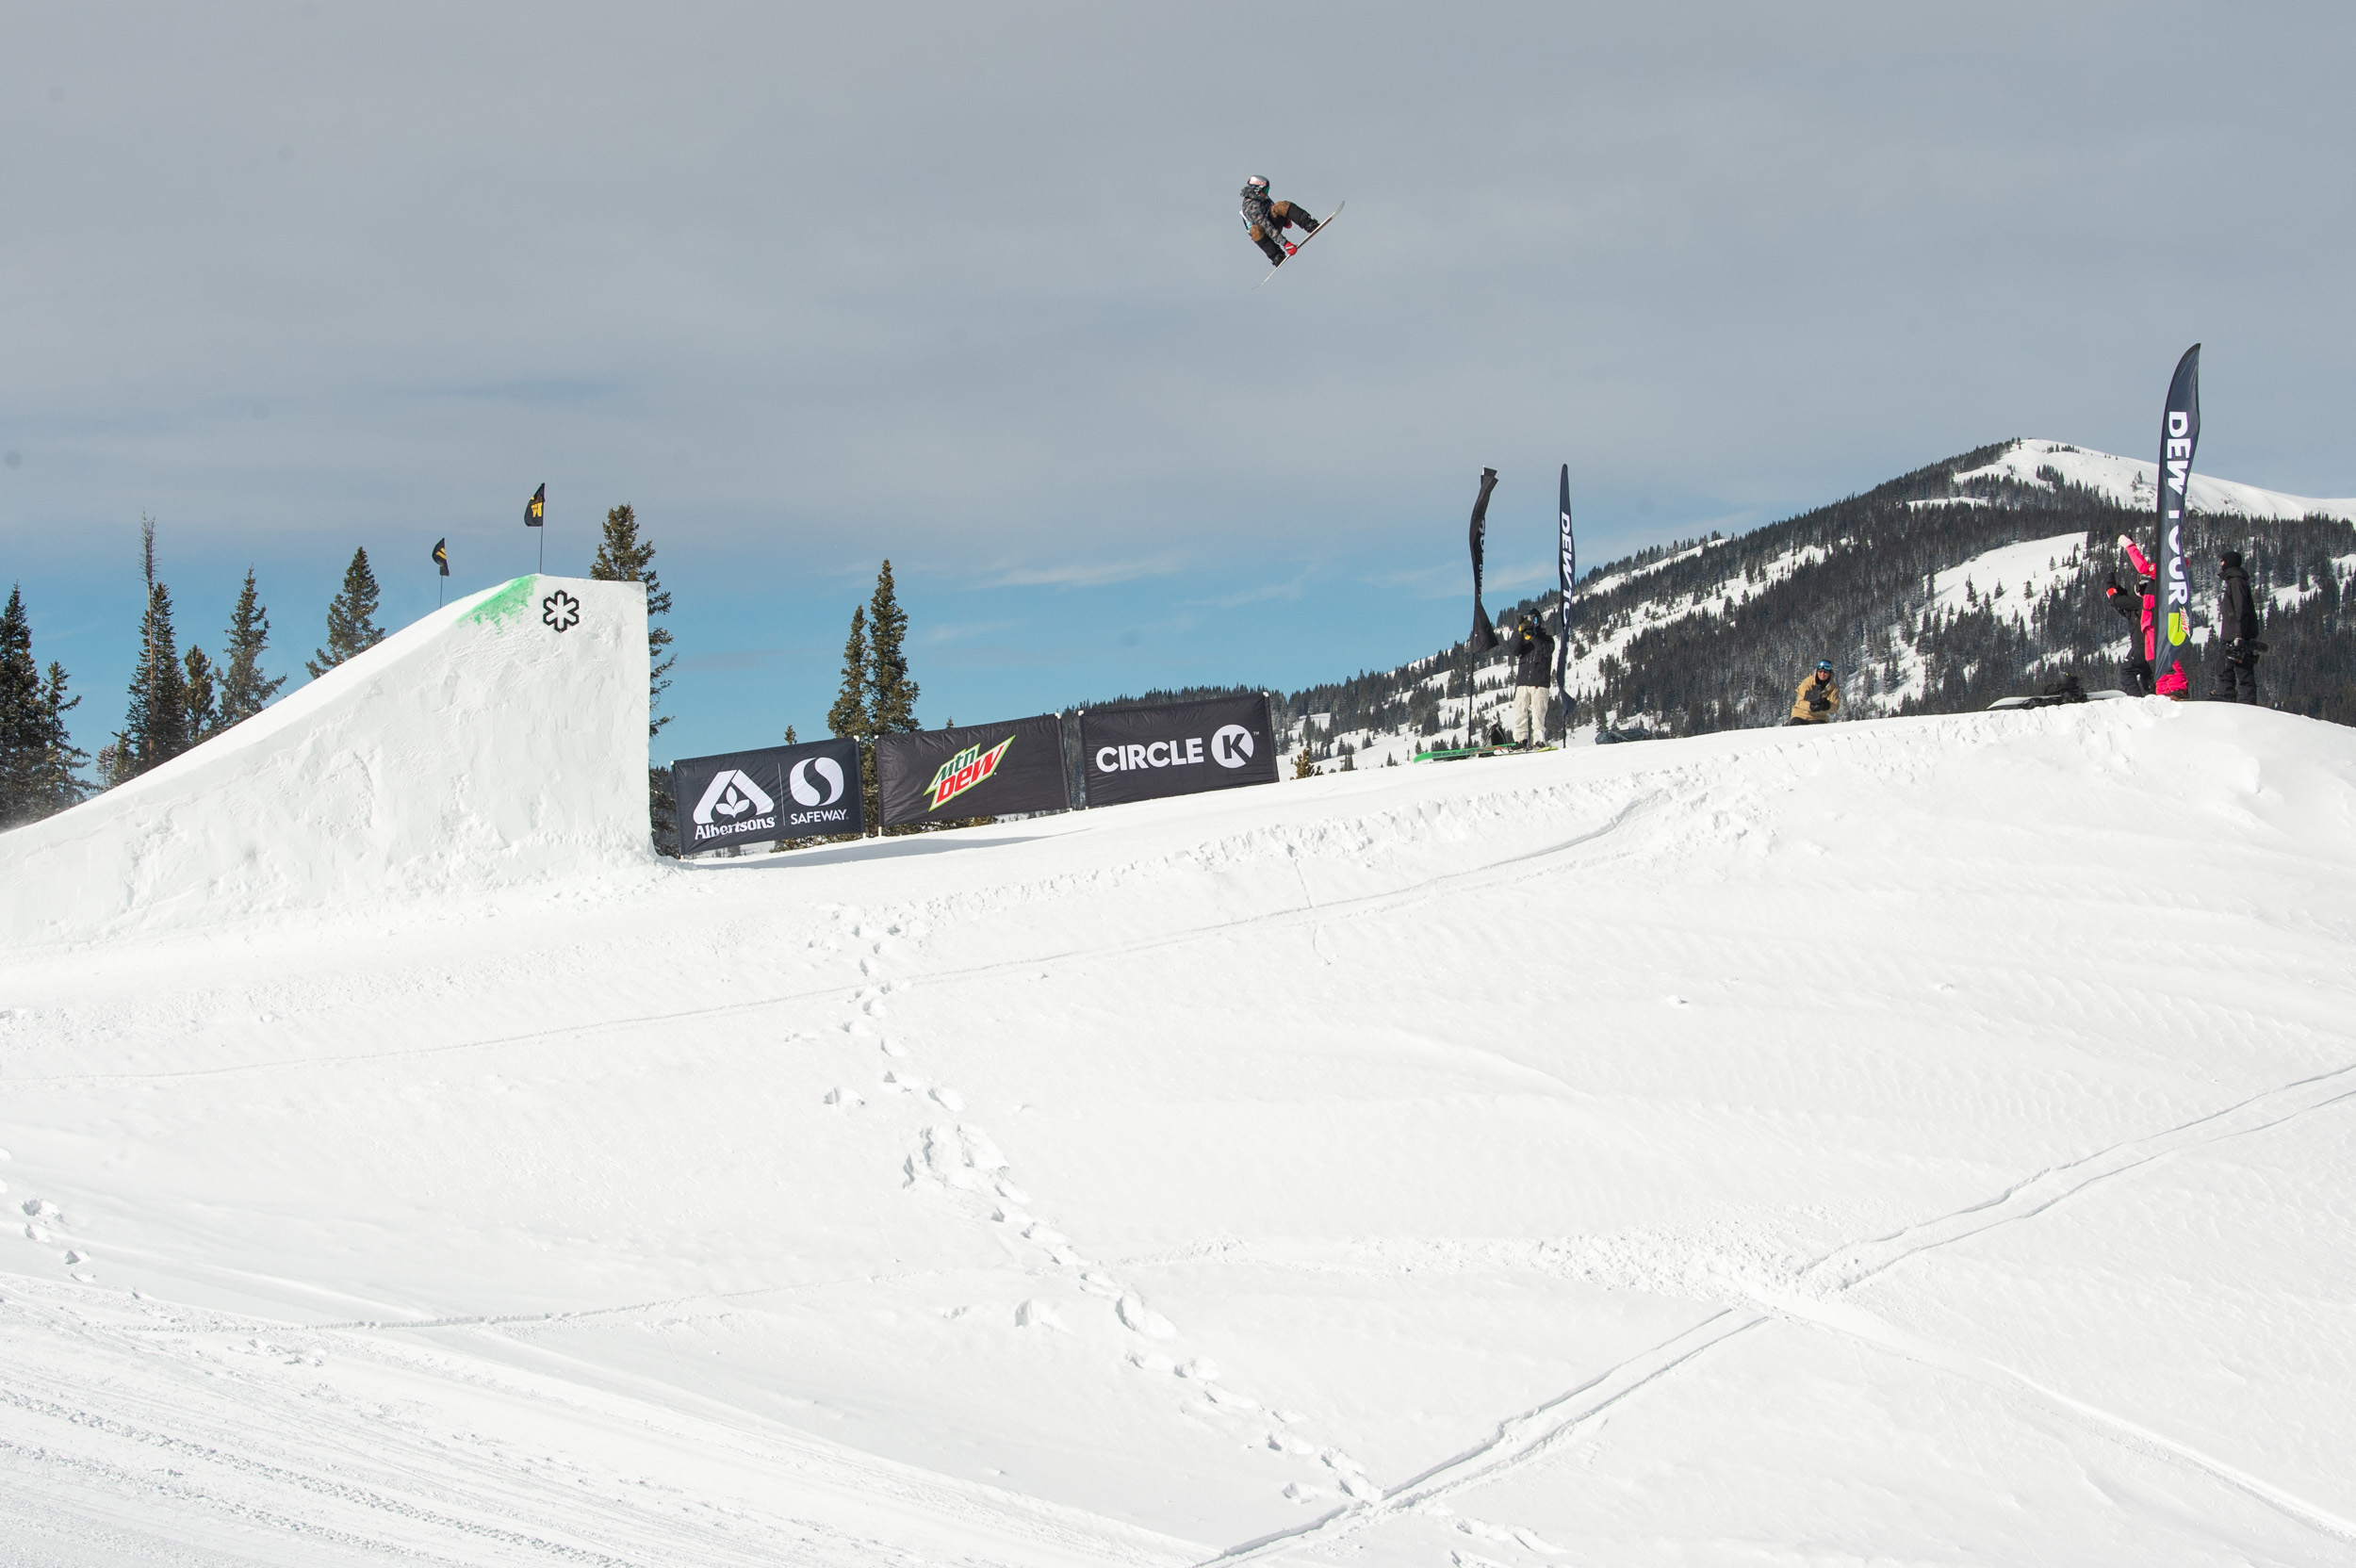 dew tour 2021 results